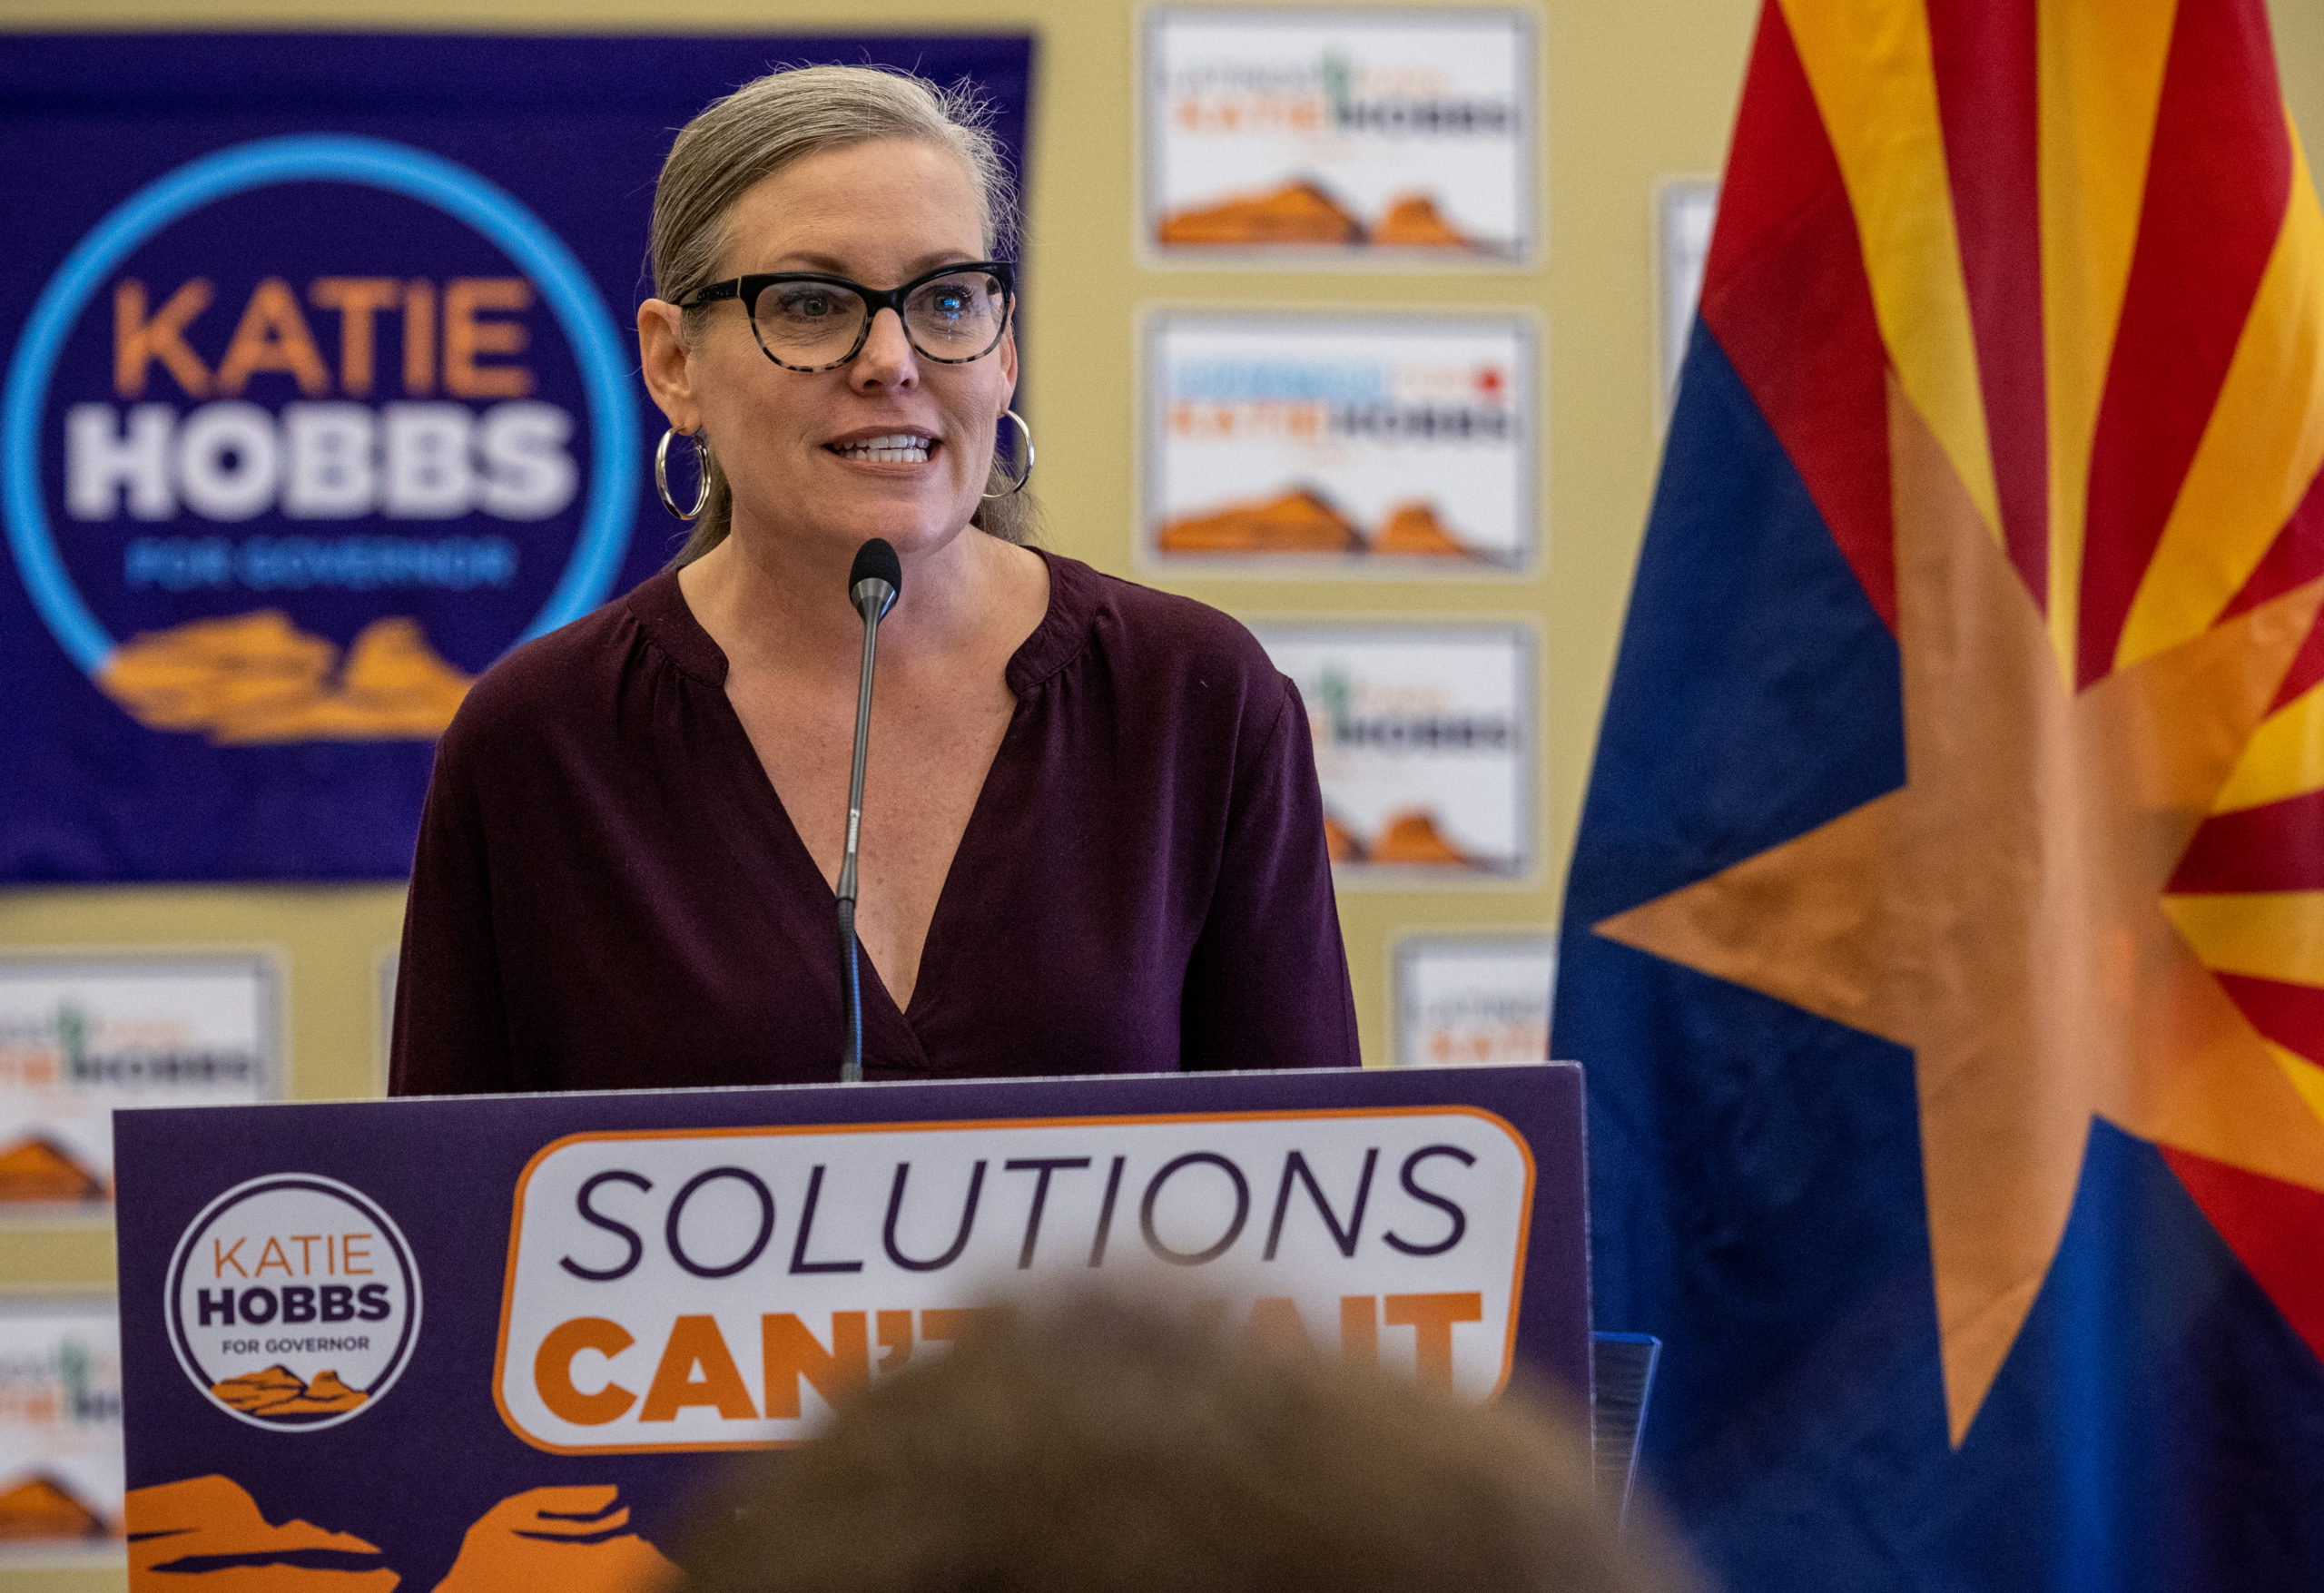 Democratic candidate for Arizona governor Katie Hobbs speaks to supporters at a campaign rally on November 06, 2022 in Tucson, Arizona. With two days remaining before the midterm election, Hobbs is in a tight race with Trump-endorsed Republican candidate Kari Lake. (Photo by John Moore/Getty Images)